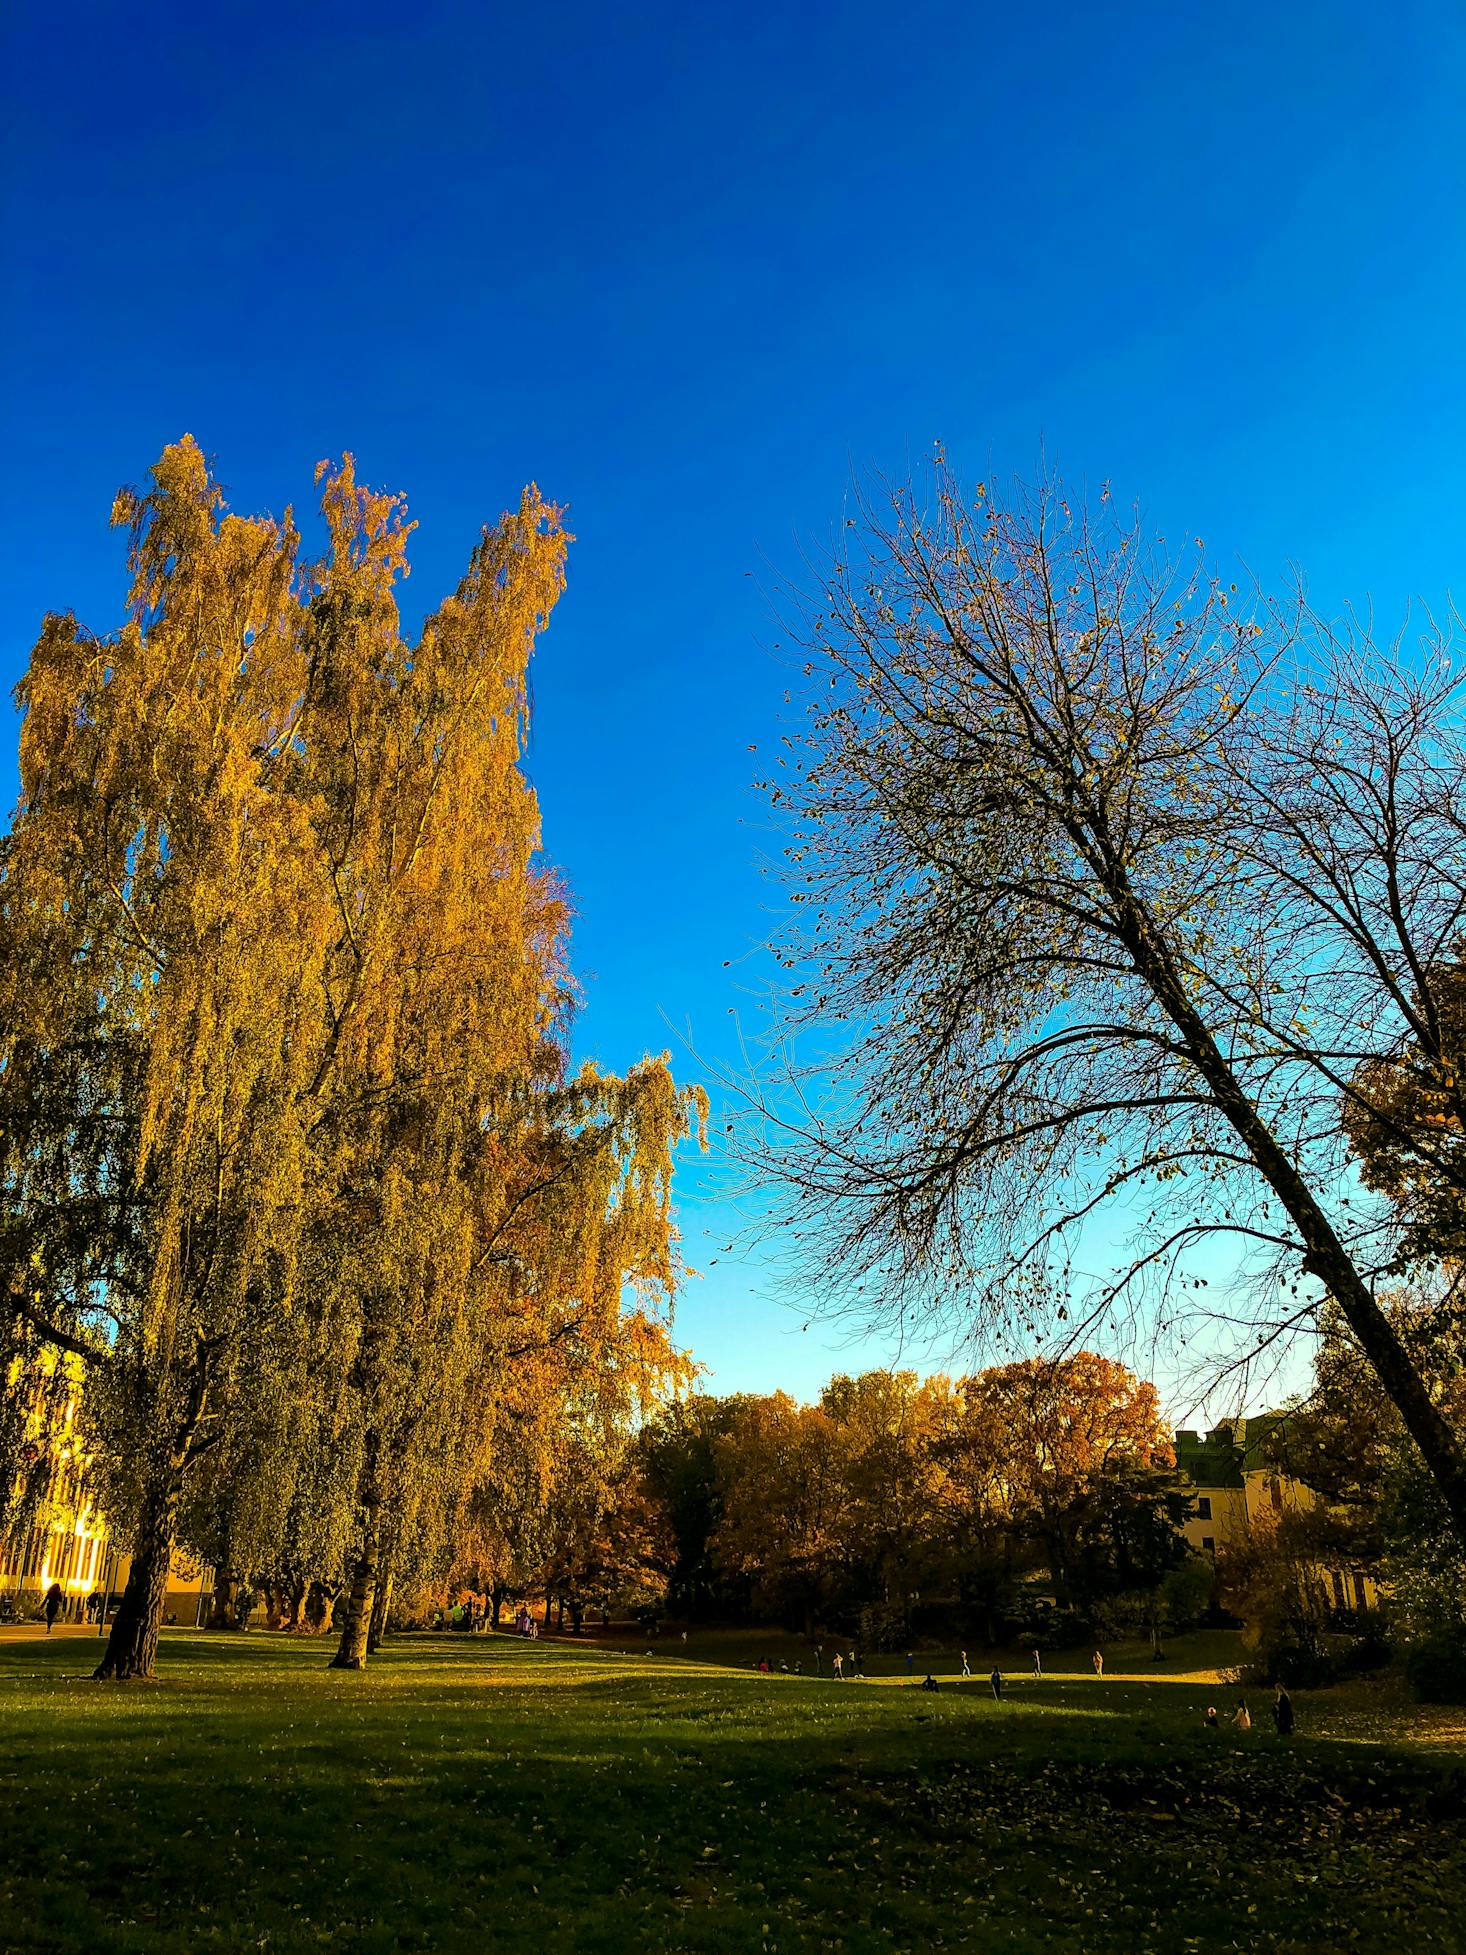 A large greenspace with a willow tree towering over the park area